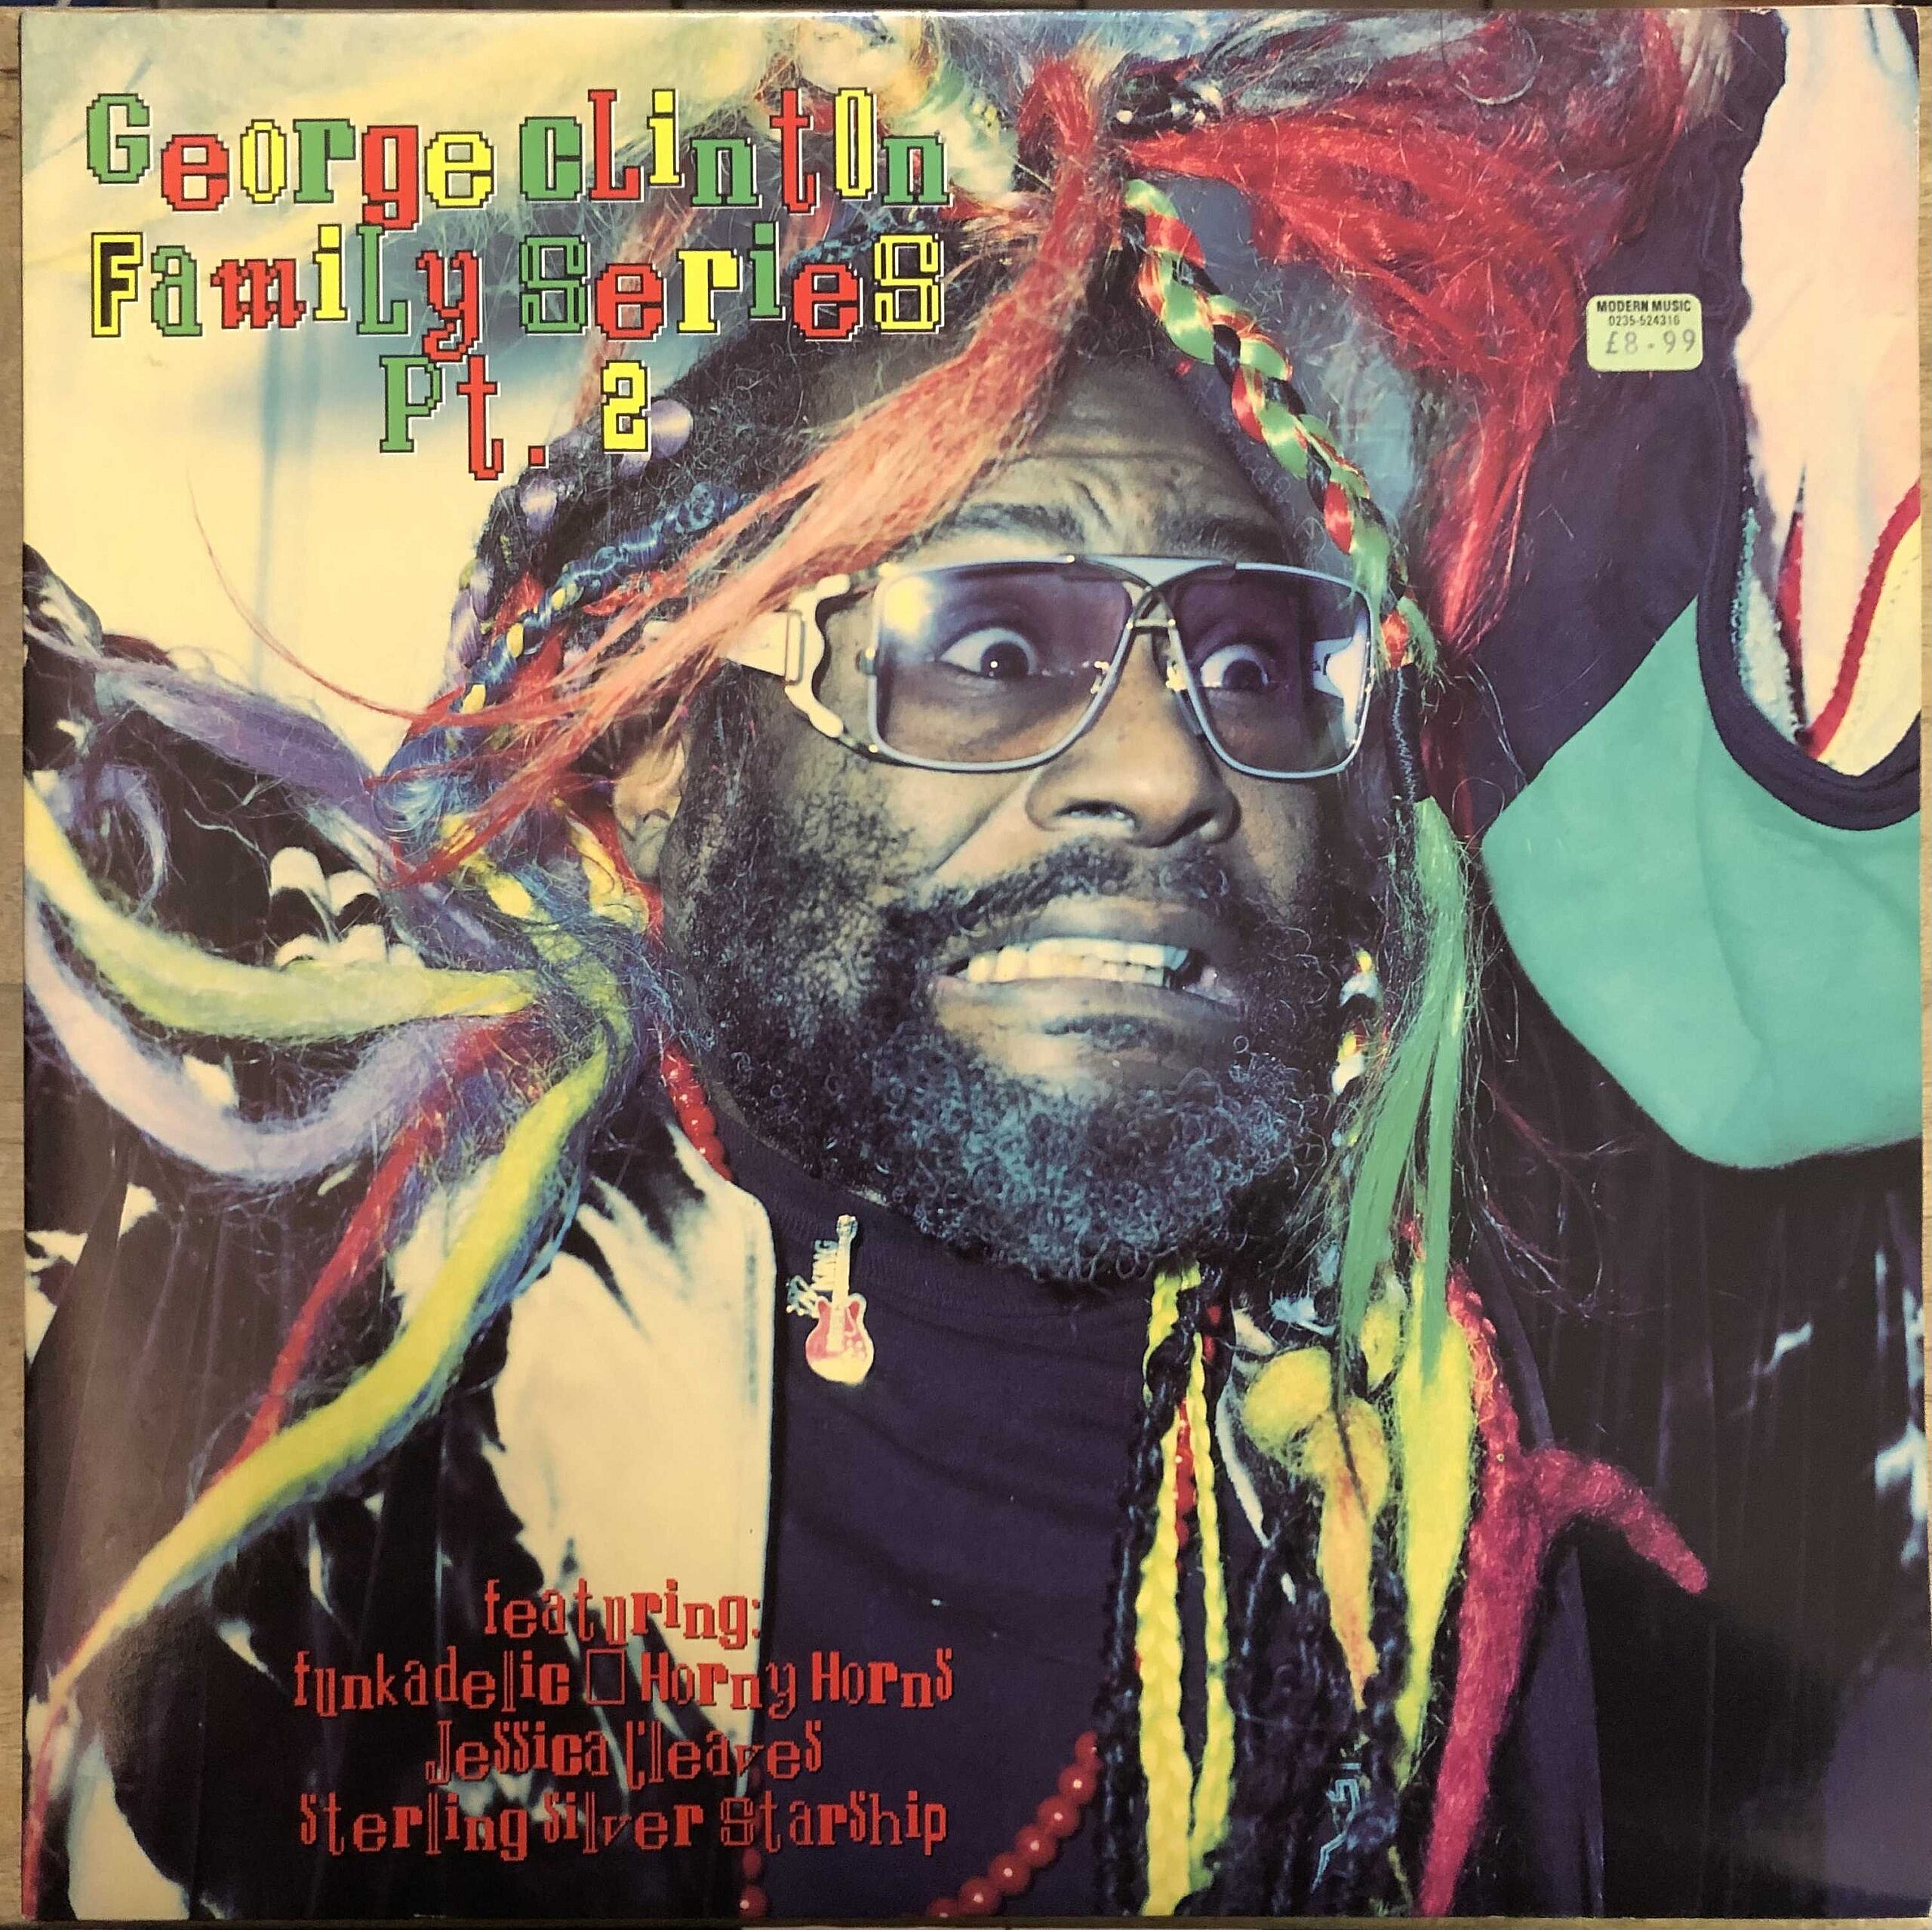 George Clinton Family Series pt2